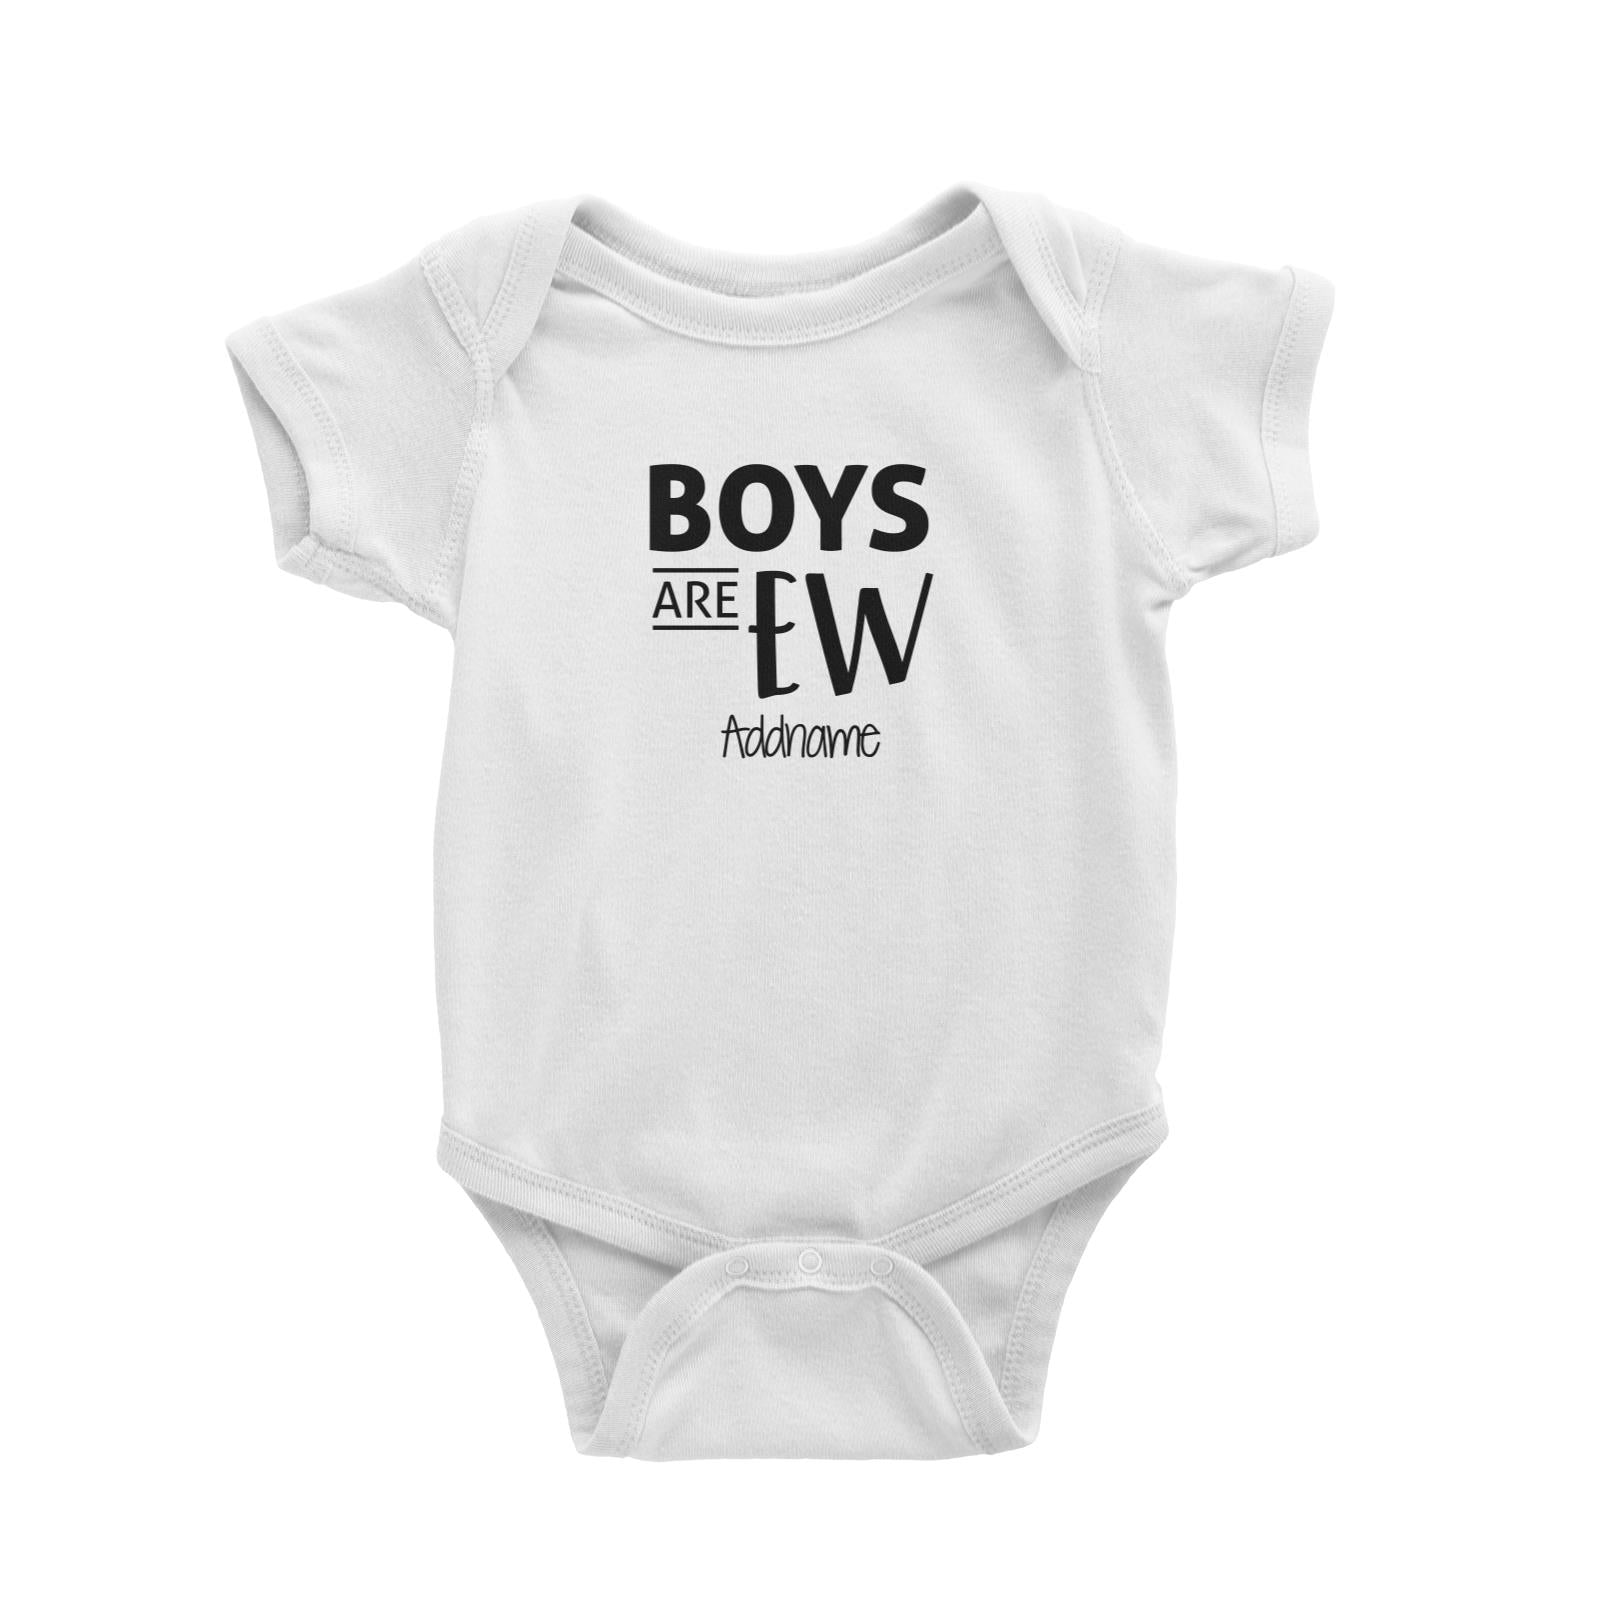 Boys Are Ew Addname Baby Romper